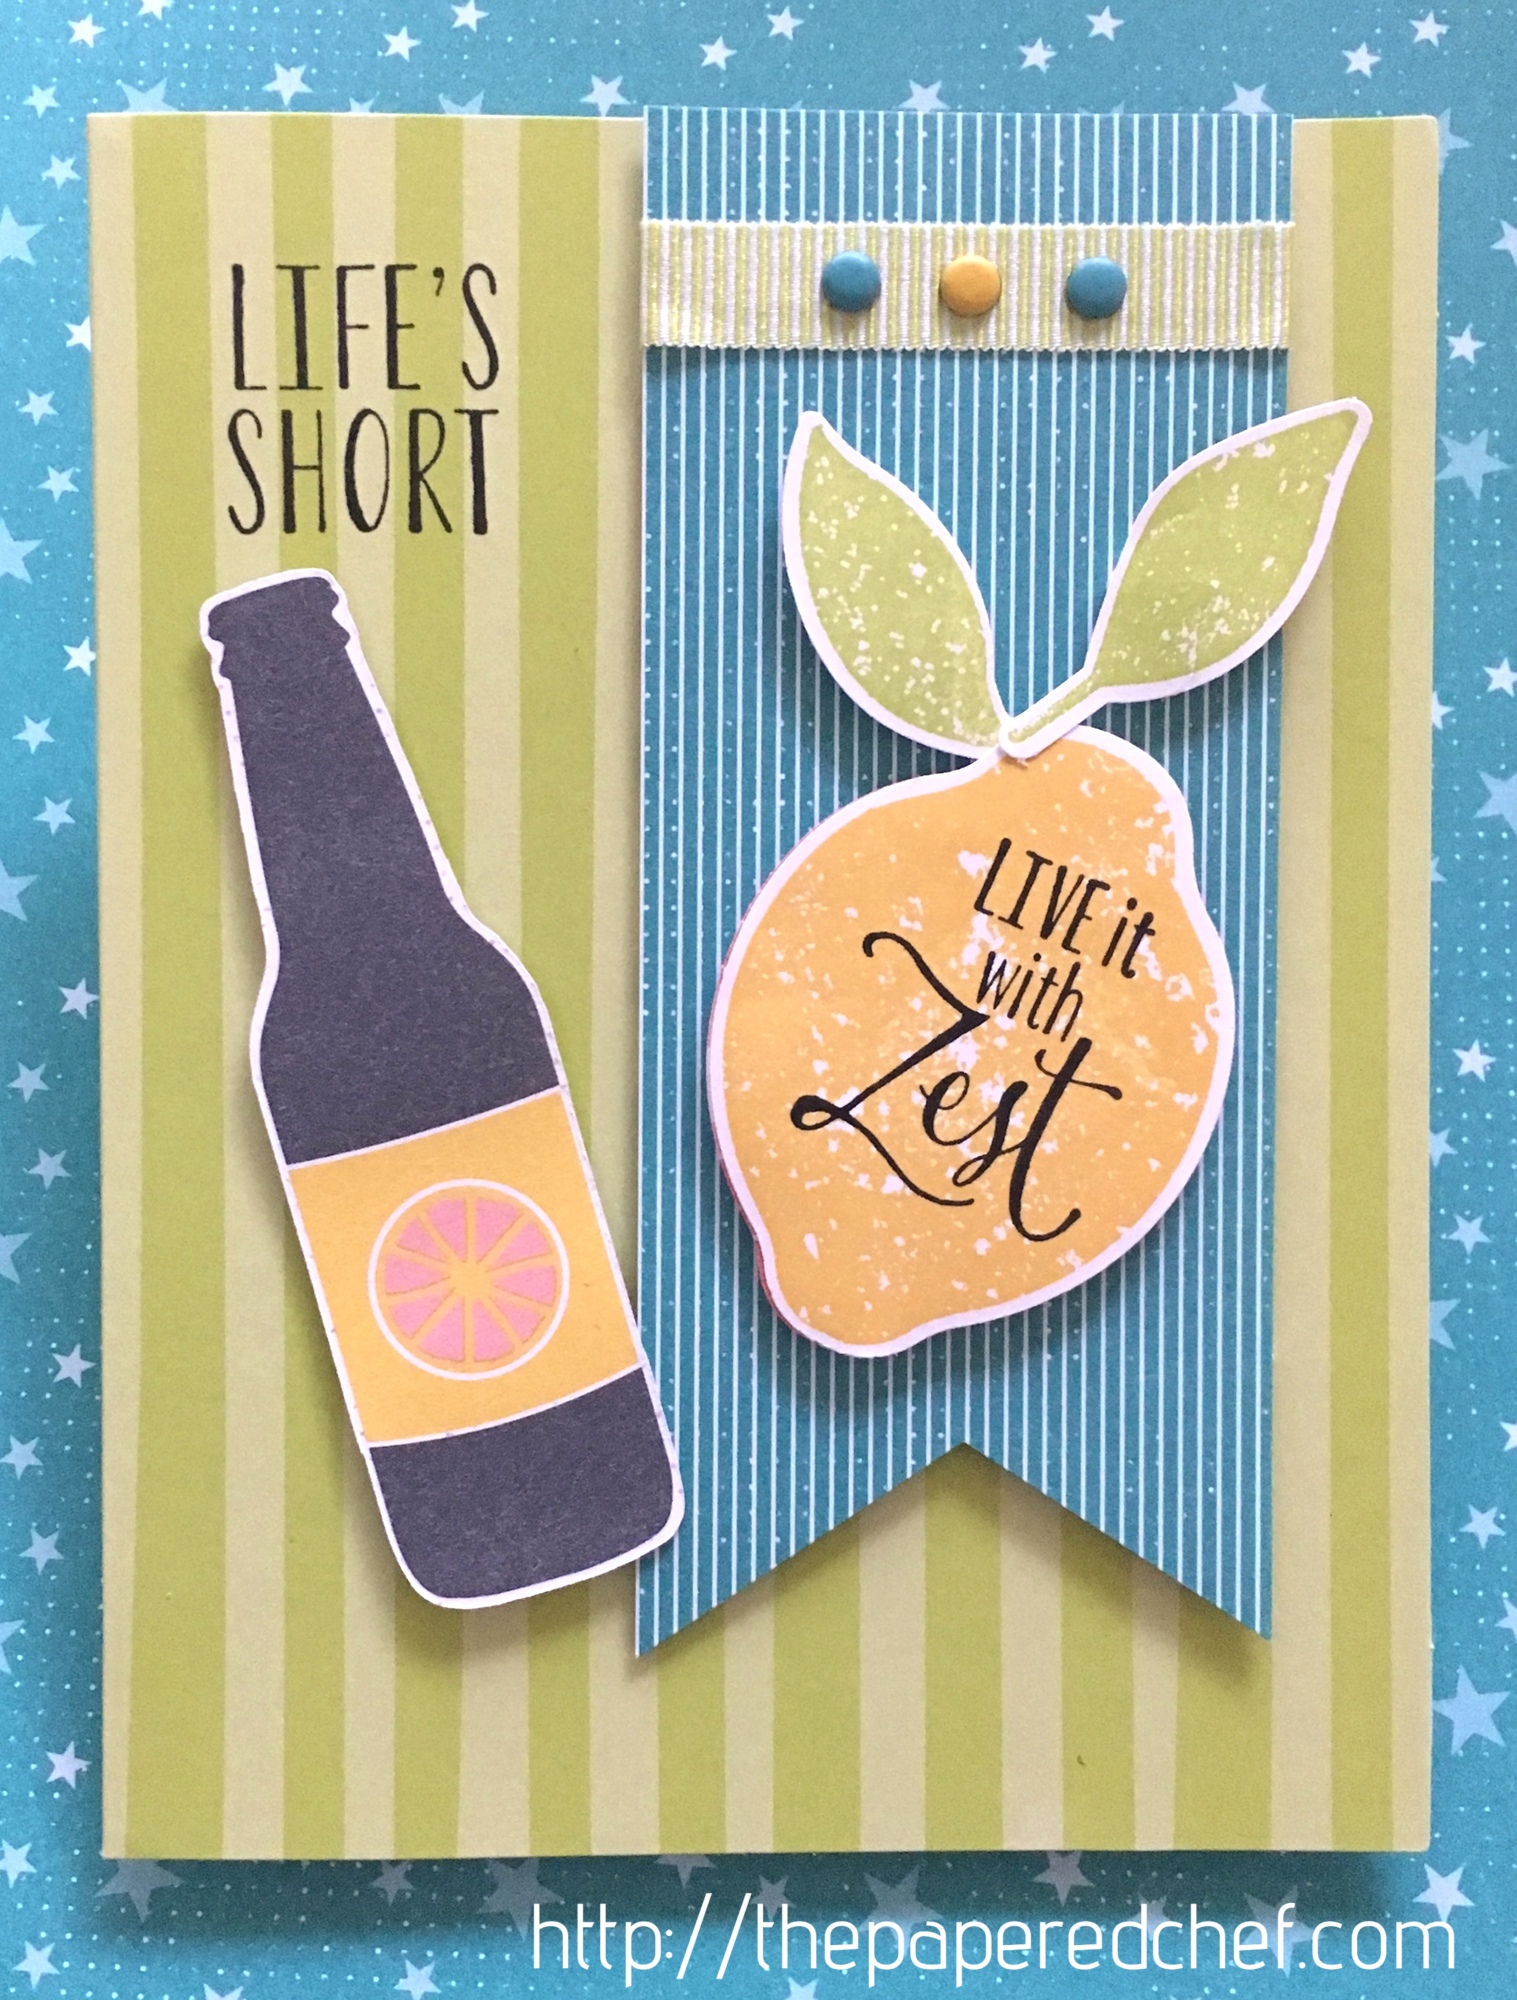 Life’s Short – Live it with Zest – Lemon card by Stampin’ Up